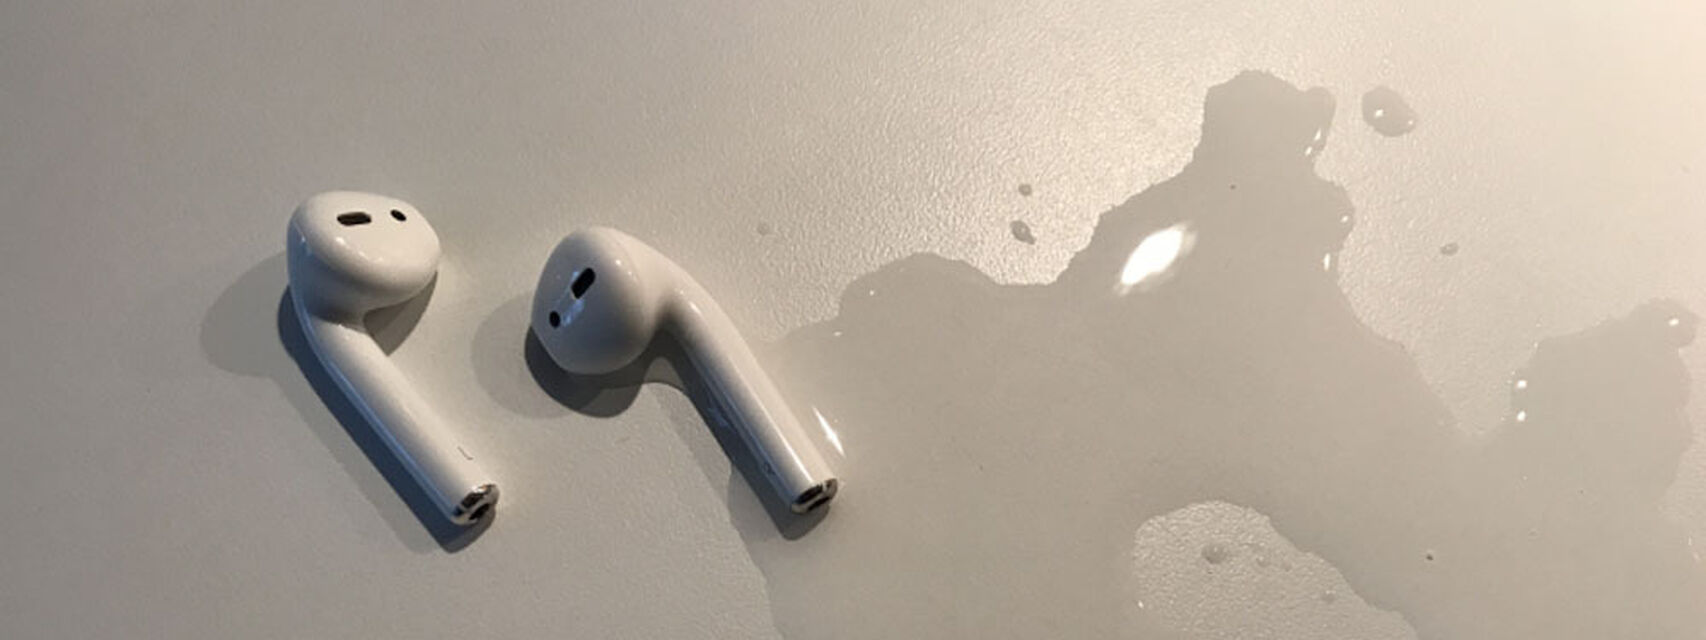 AirPods with water resistance and noise cancellation will arrive next year